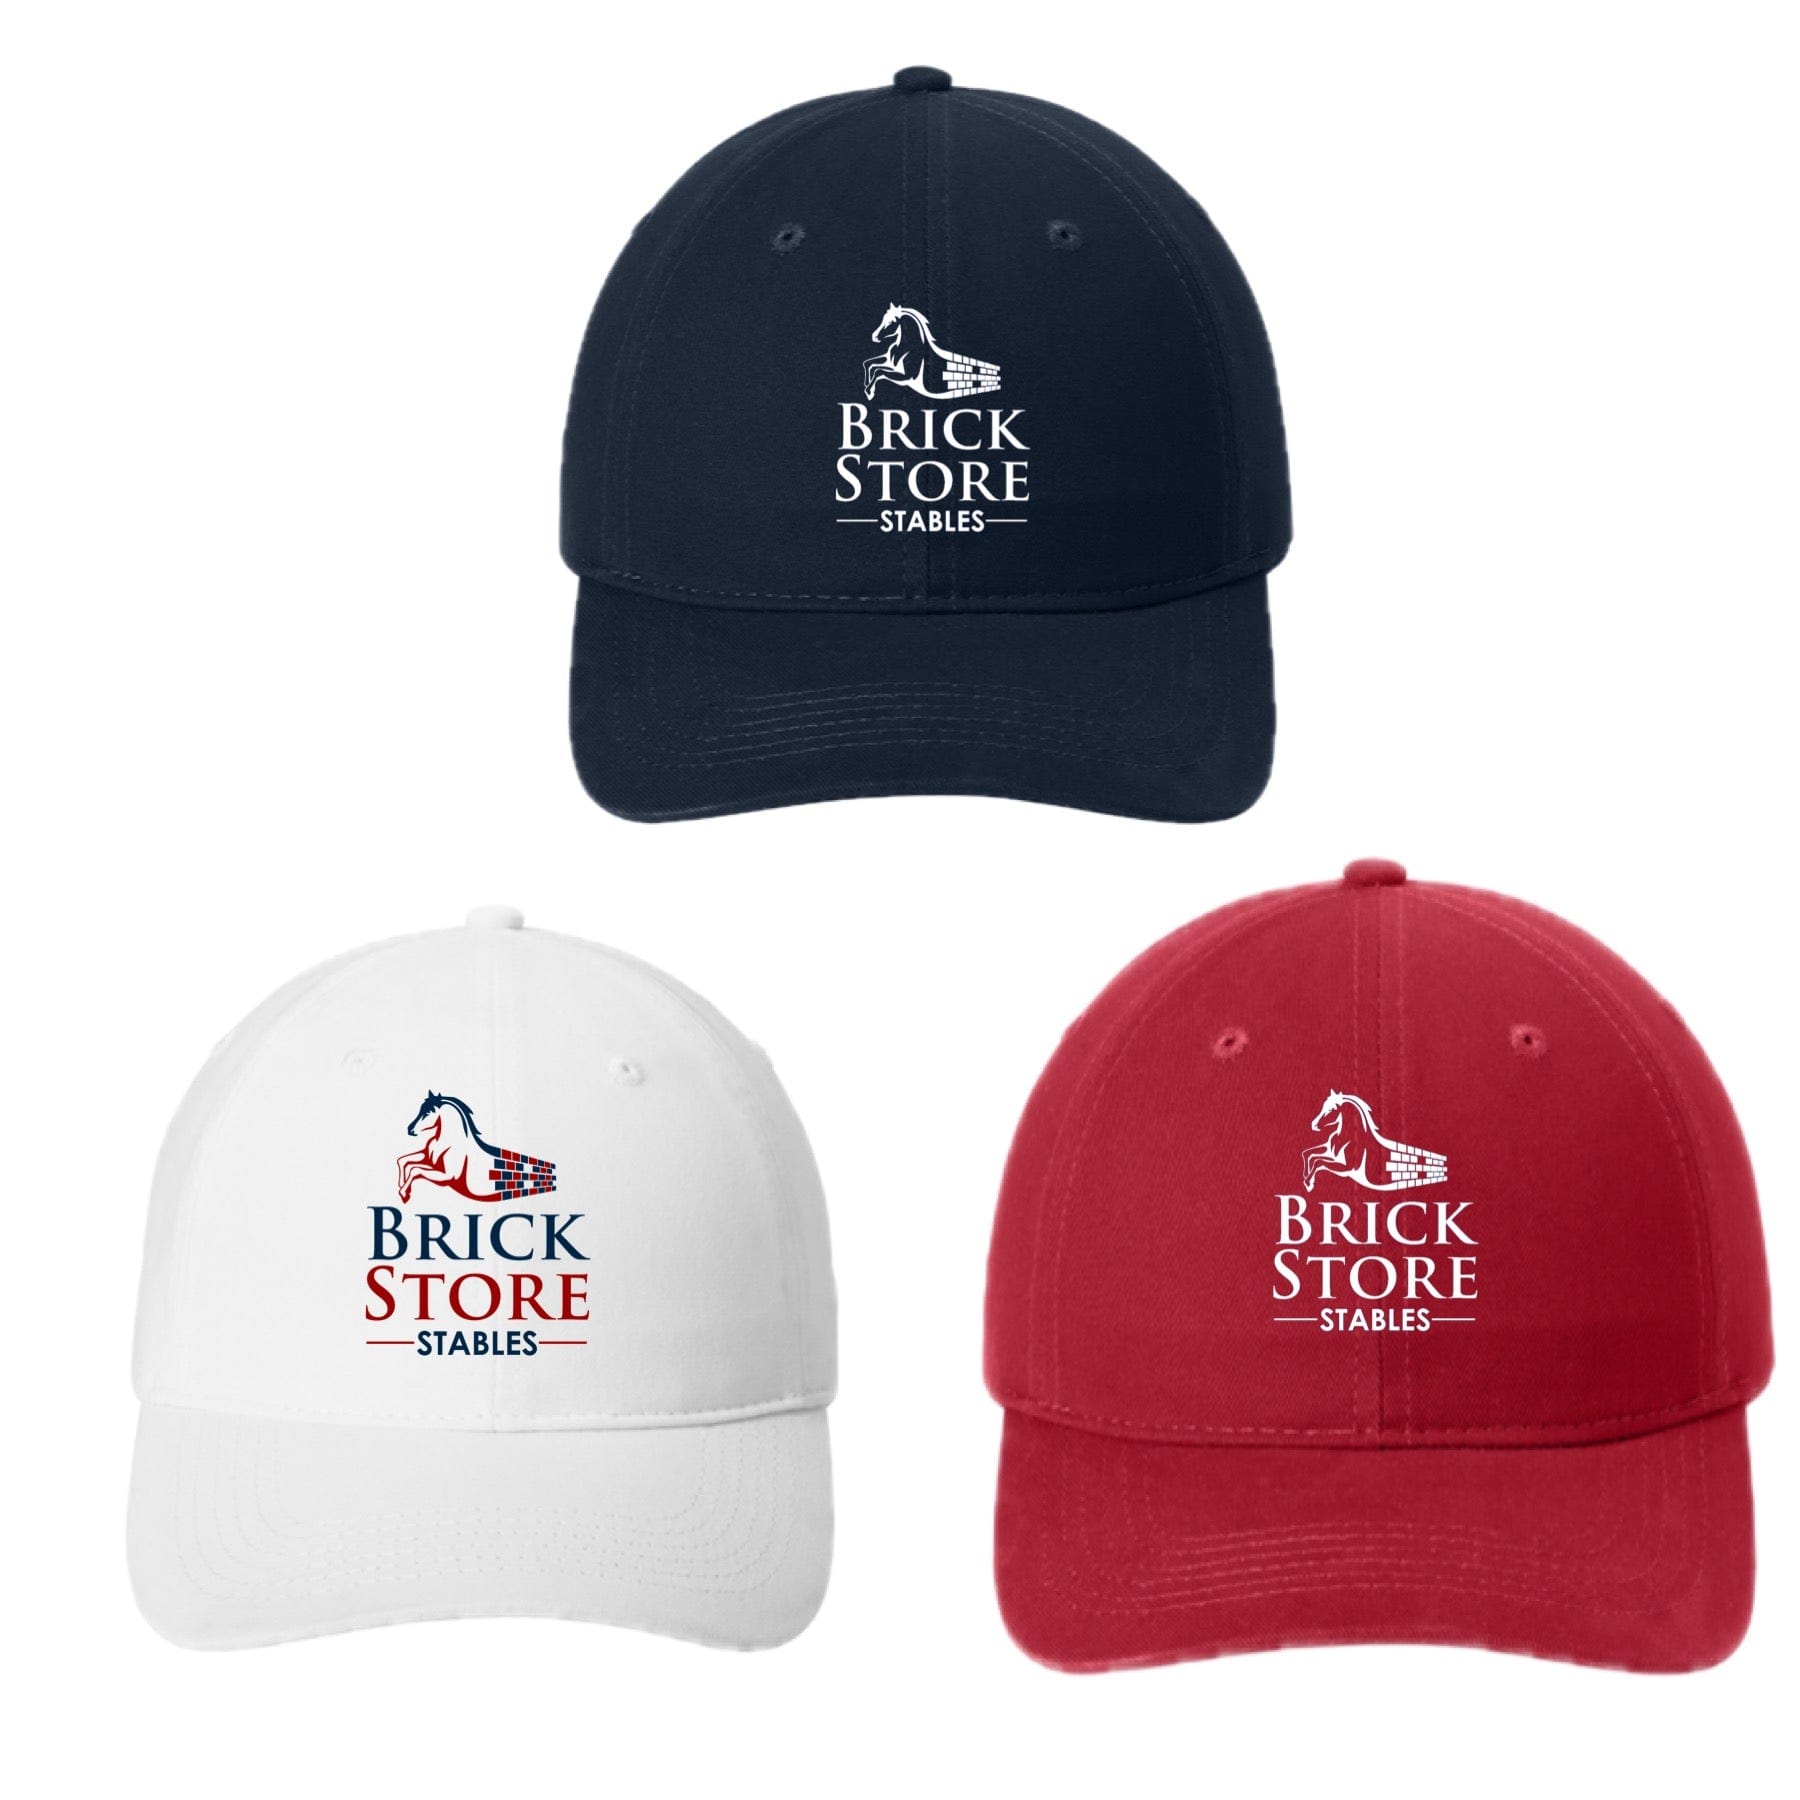 Equestrian Team Apparel Brick Store Stables Baseball Cap equestrian team apparel online tack store mobile tack store custom farm apparel custom show stable clothing equestrian lifestyle horse show clothing riding clothes horses equestrian tack store